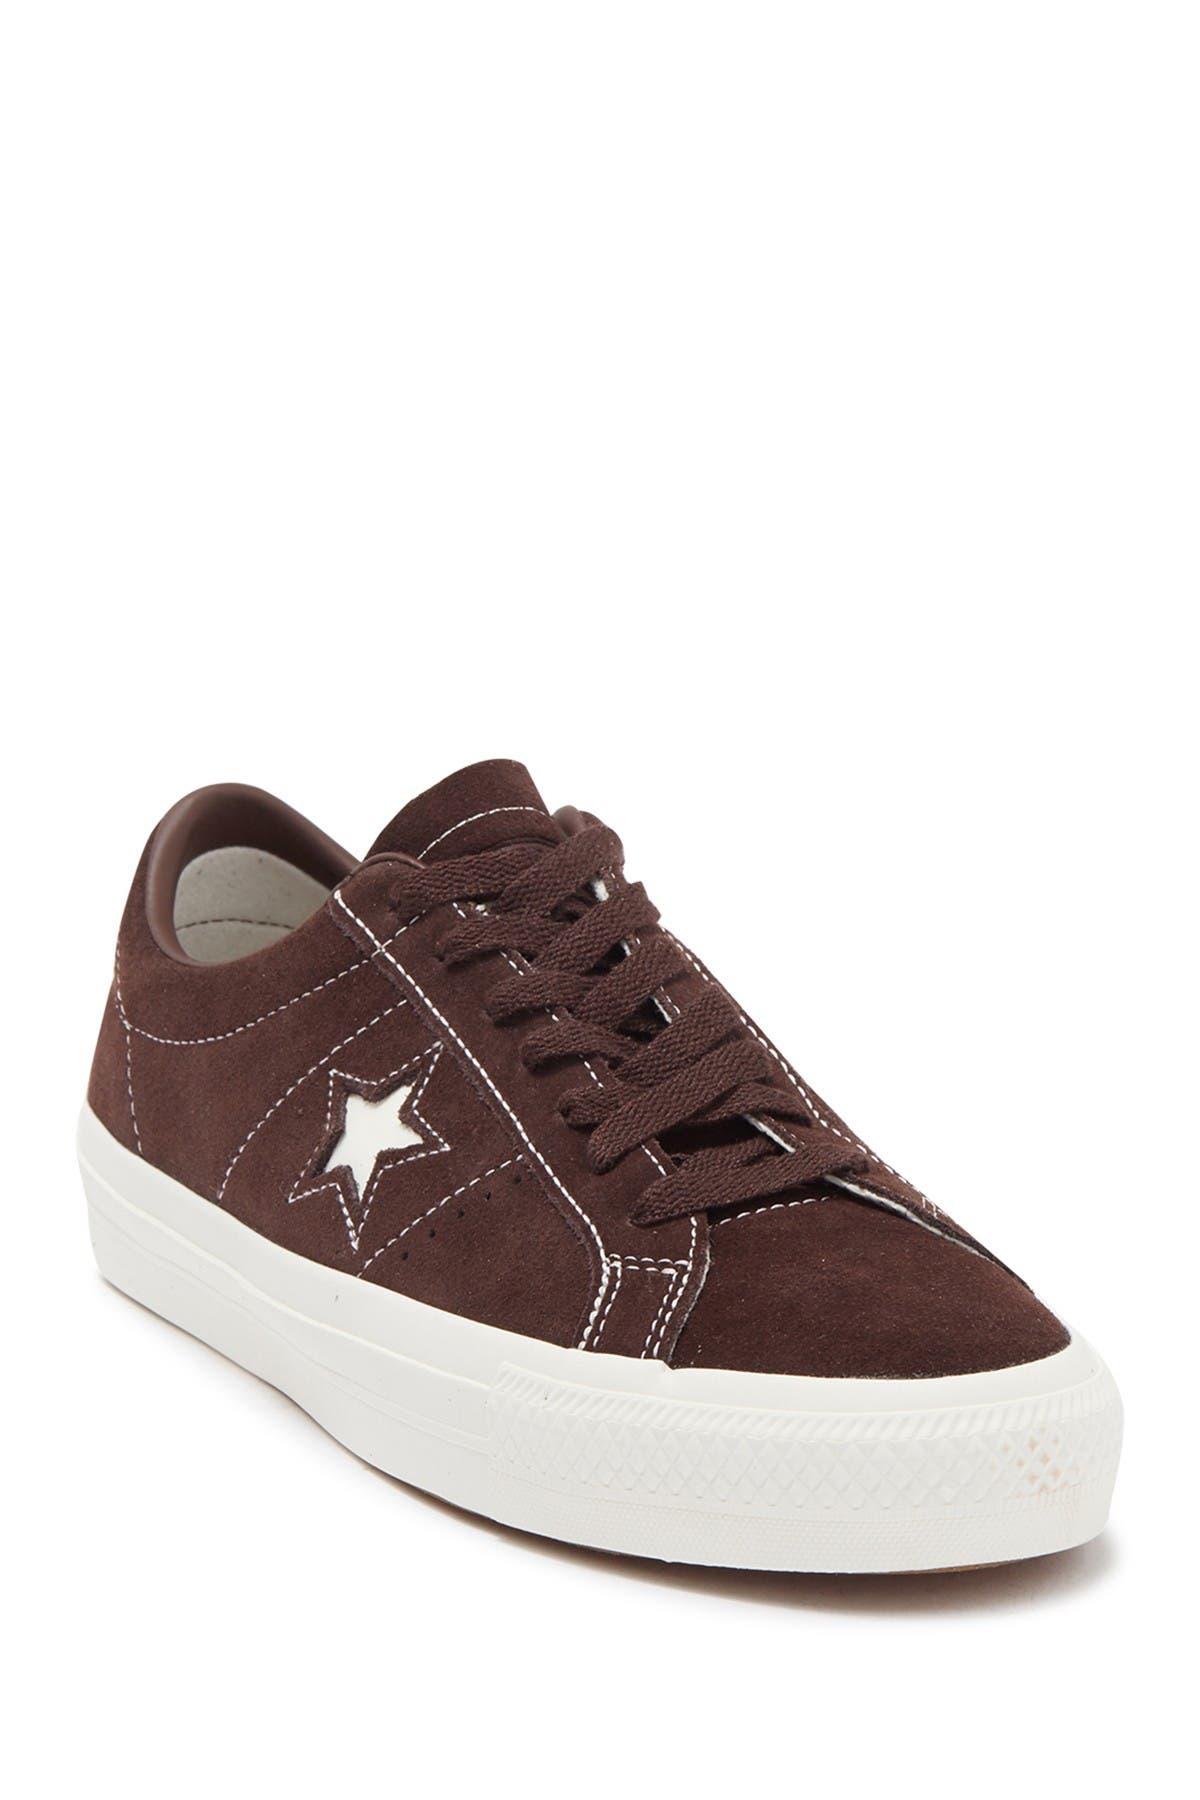 Converse One Pro Oxford Sneaker in for Lyst